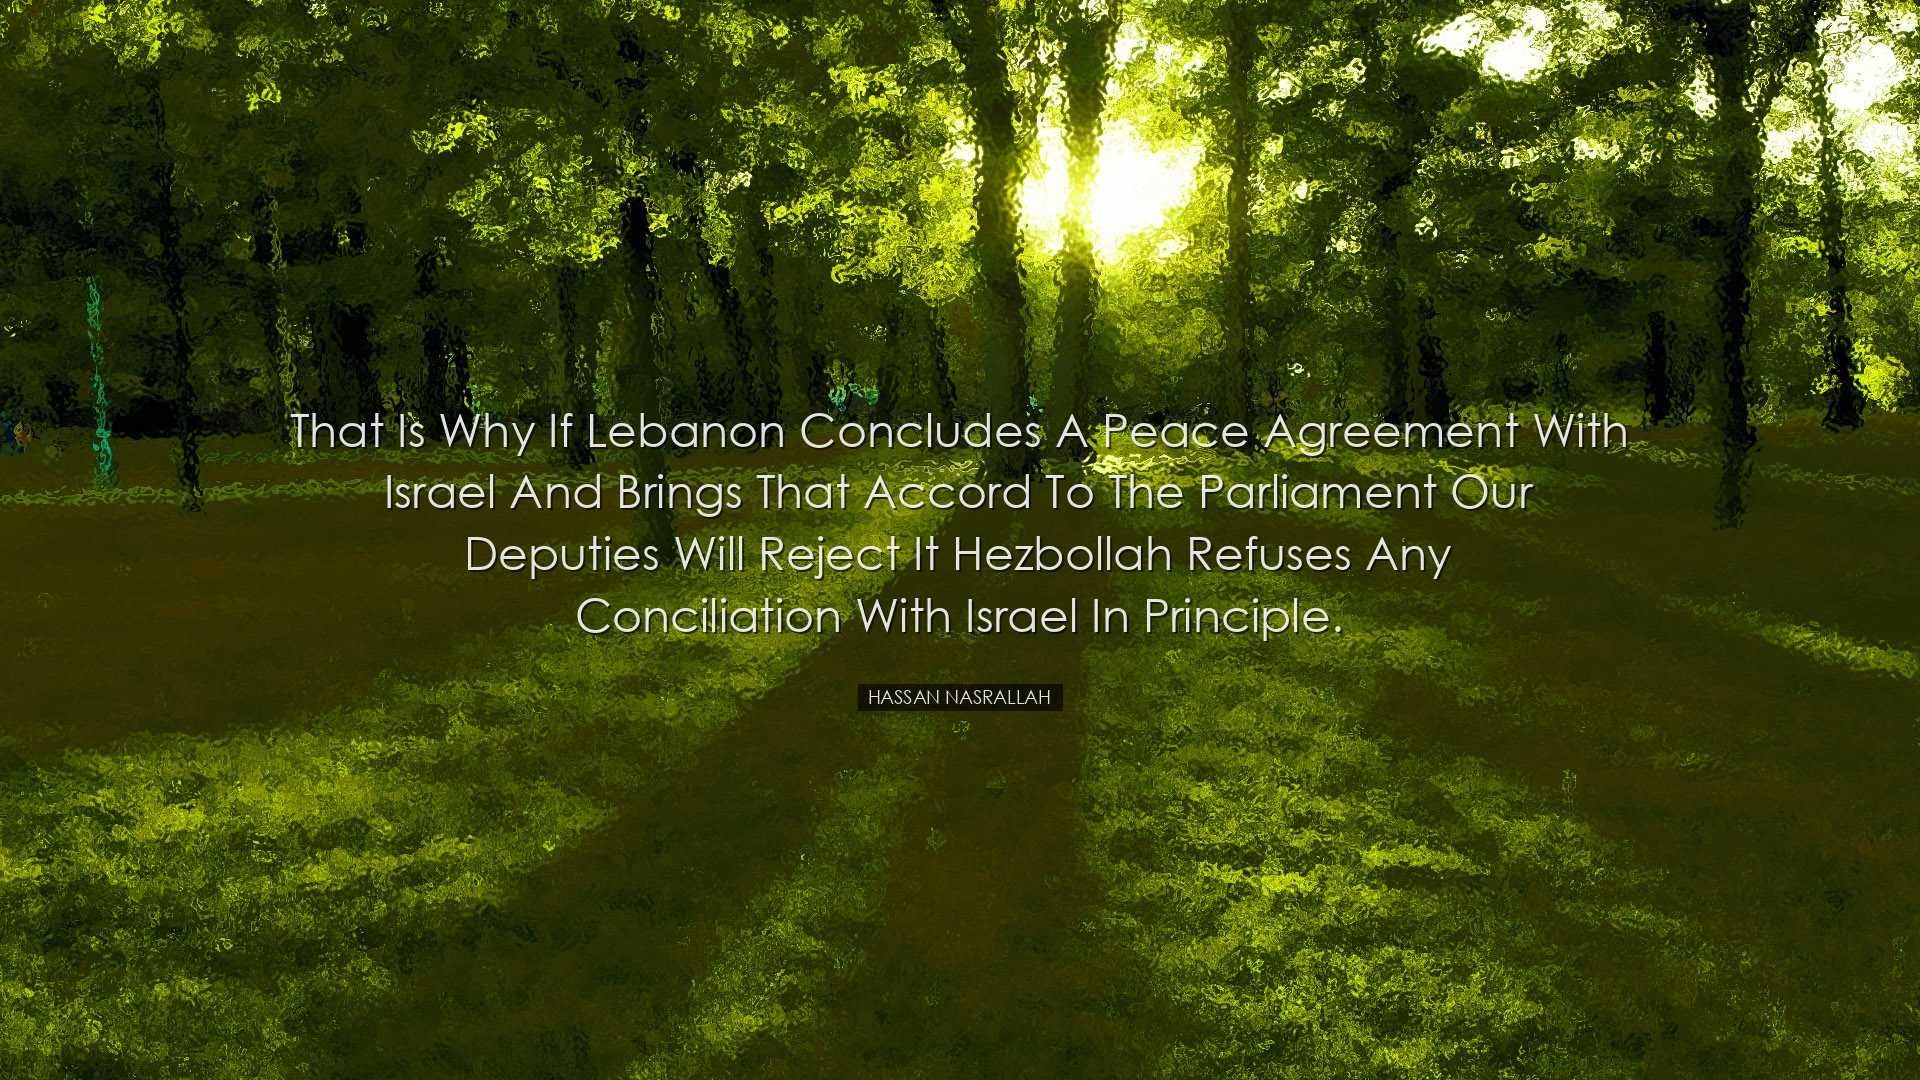 That is why if Lebanon concludes a peace agreement with Israel and